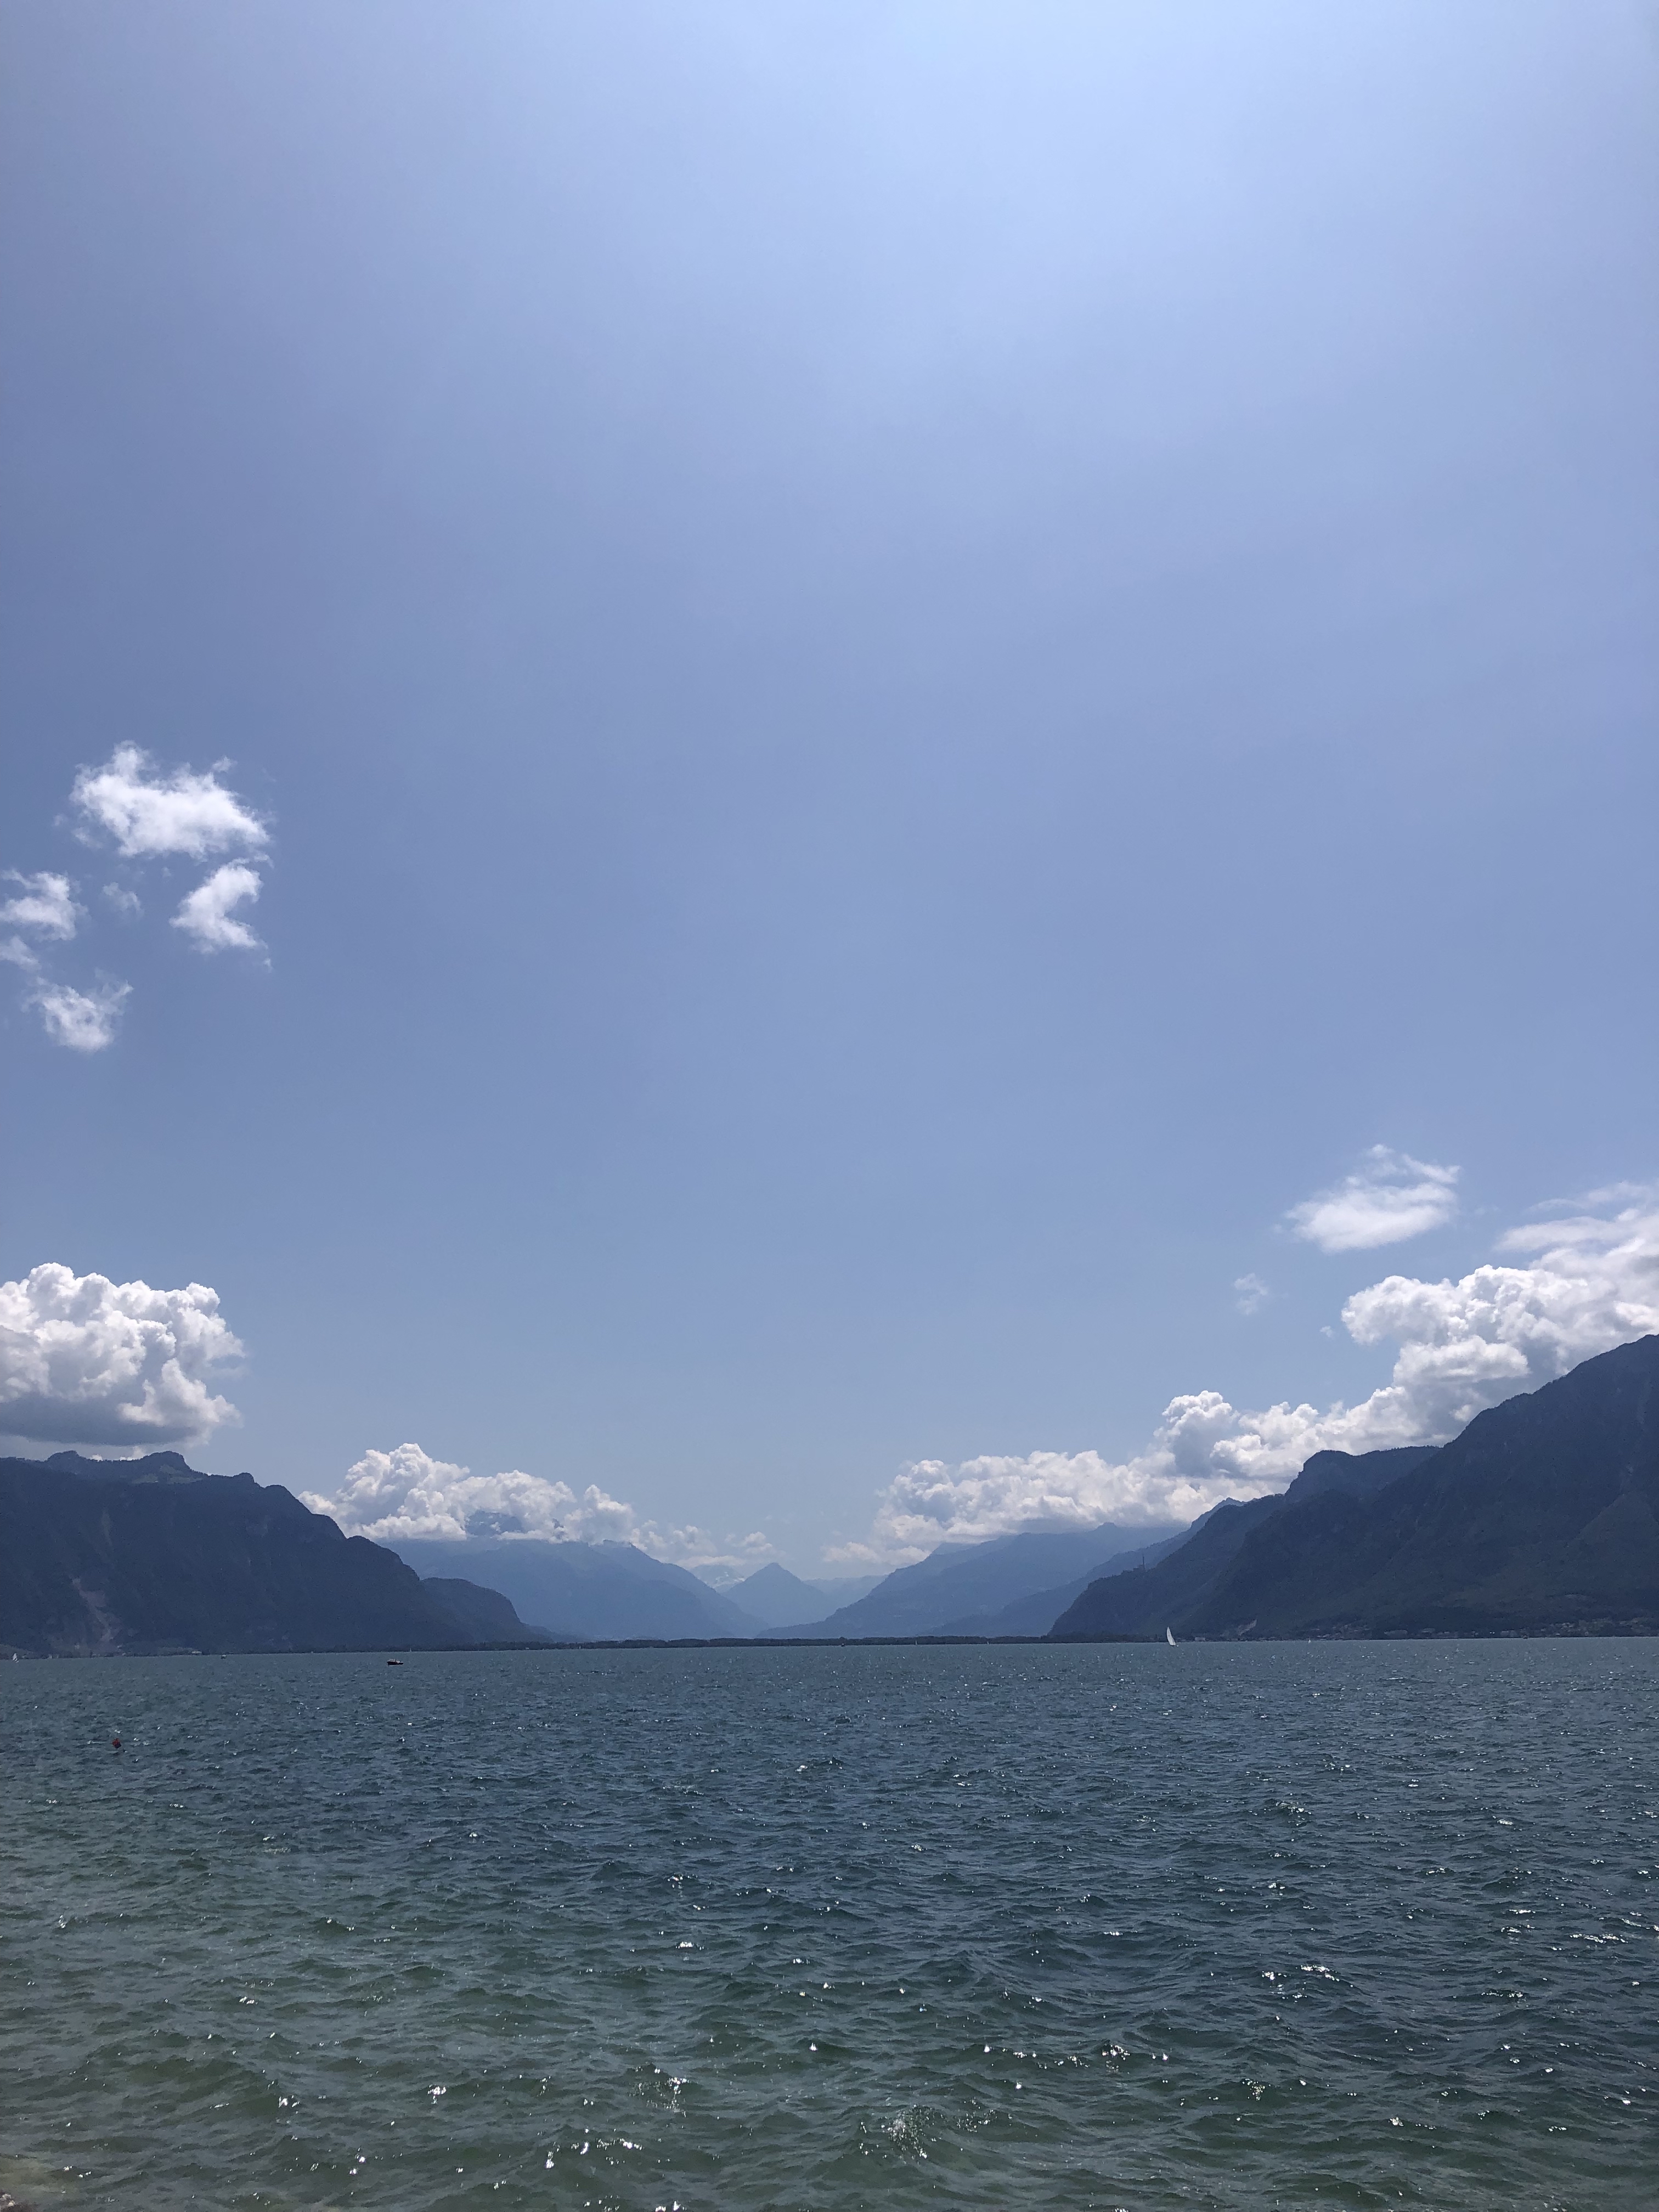 Lake Geneva with a blue sky and mountains